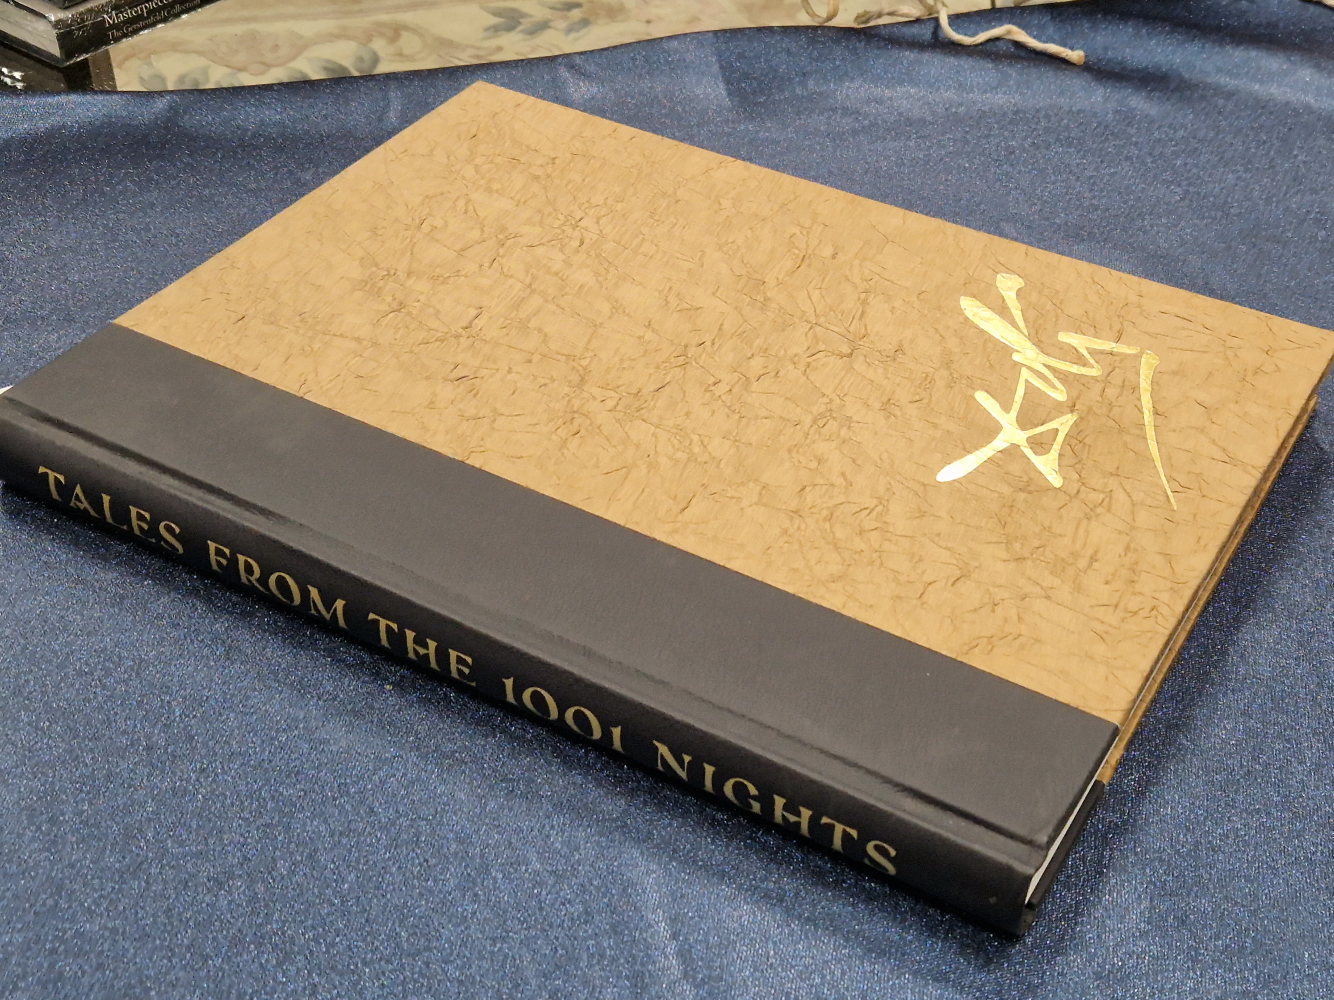 SALVADOR DALI, TALES FROM THE 1001 NIGHTS, FIFTY ILLUSTRATIONS, 325/750, FOLIO SOCIETY, 2016 - Image 5 of 10